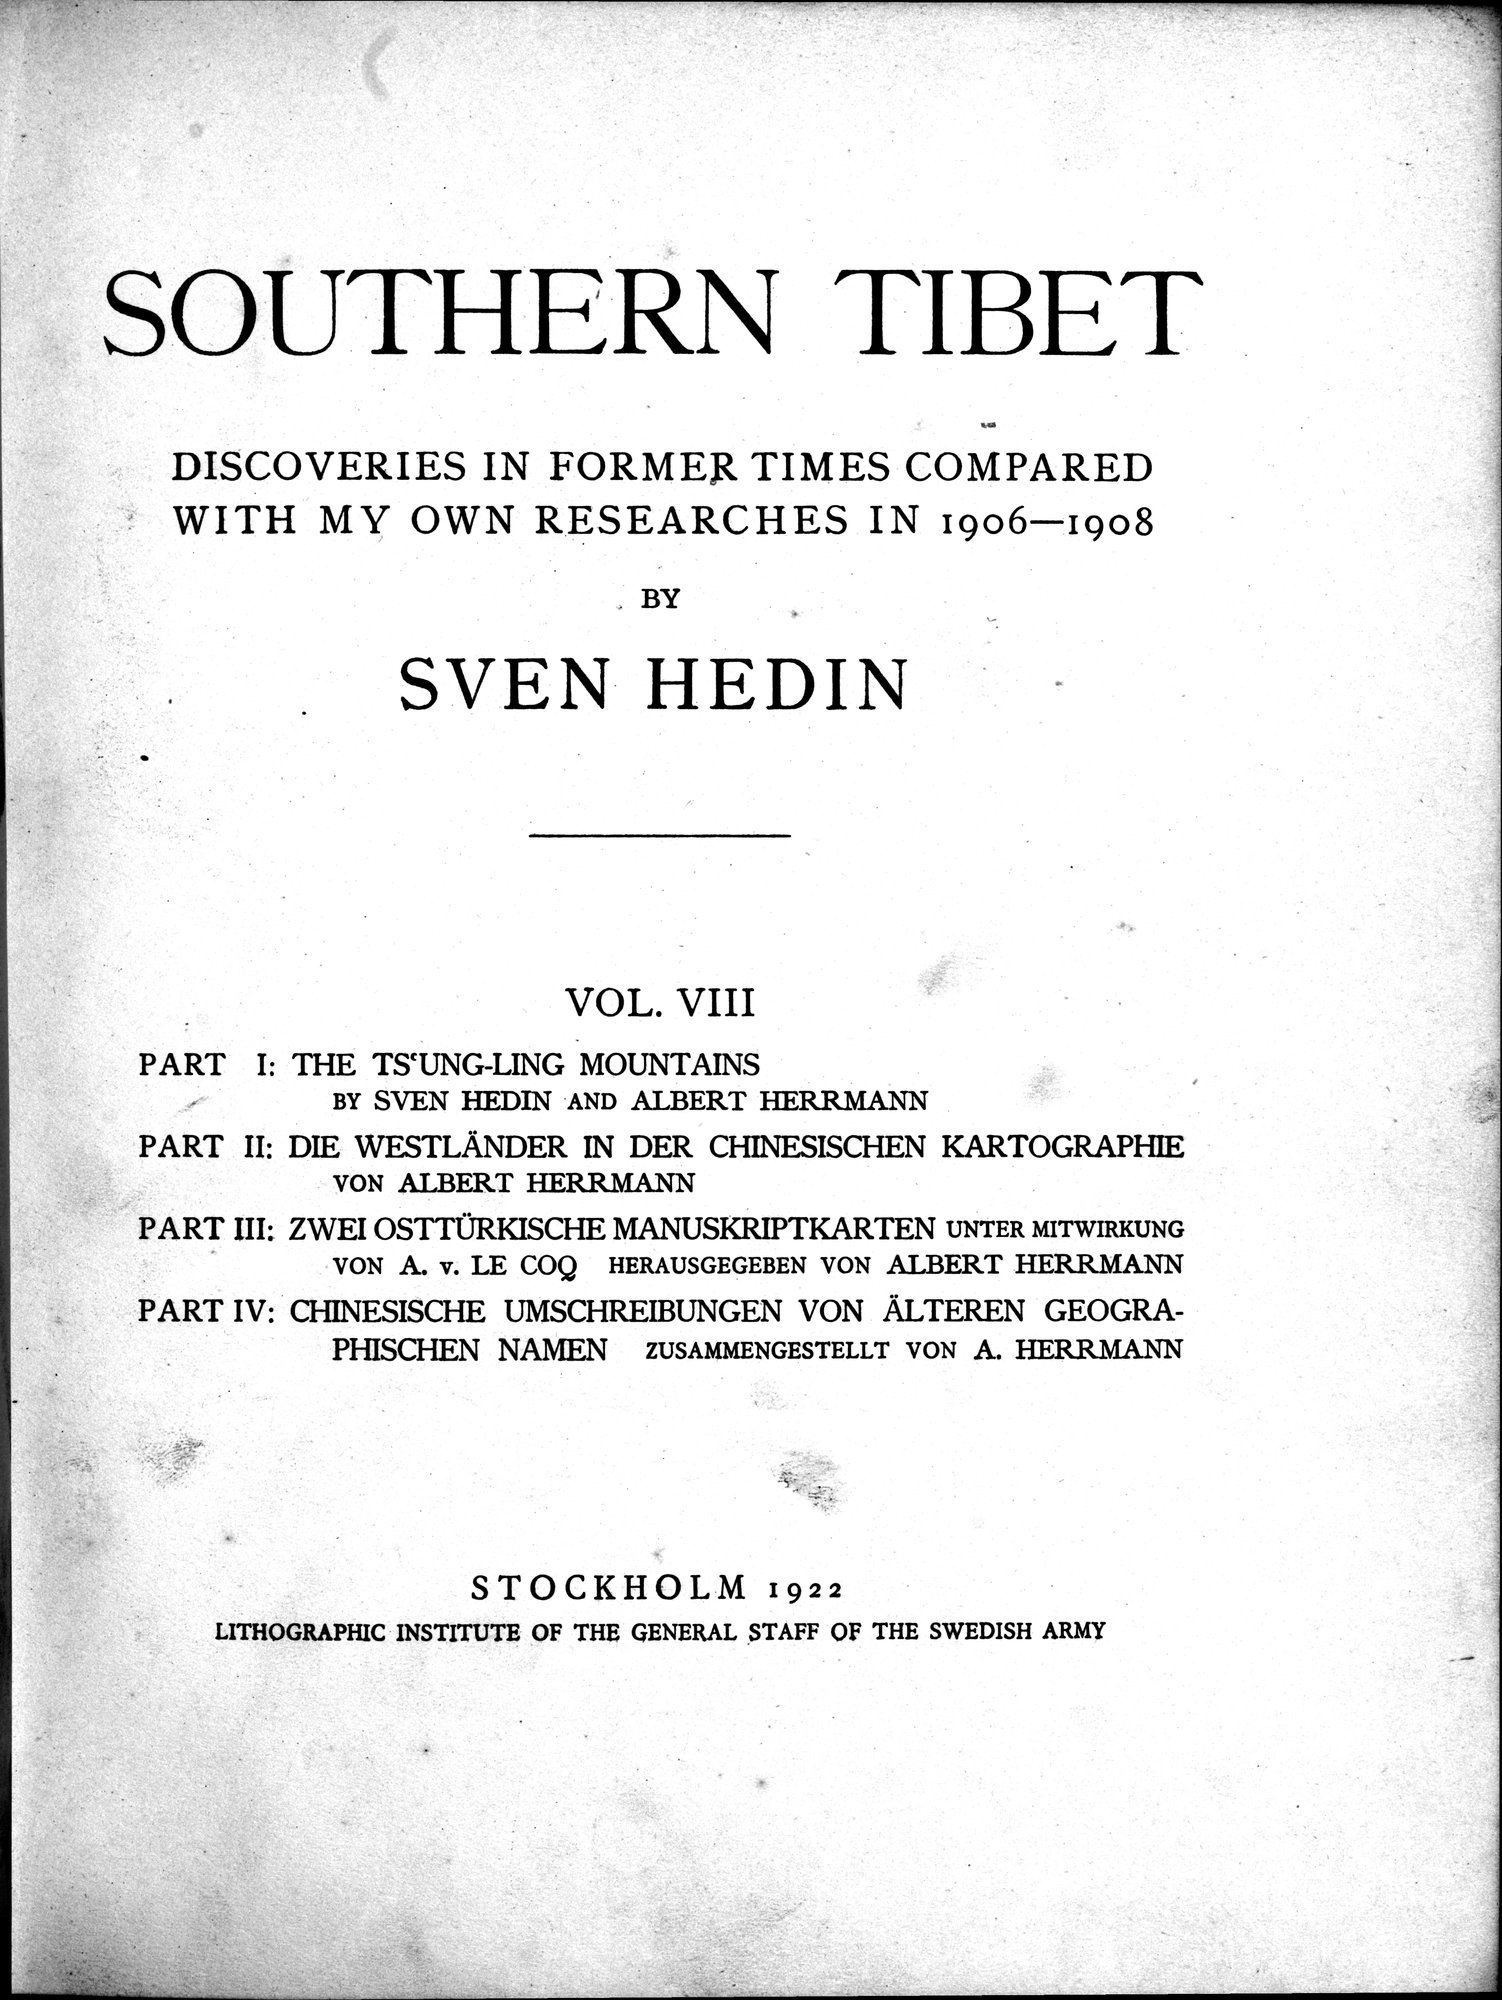 Southern Tibet : vol.8 / Page 11 (Grayscale High Resolution Image)